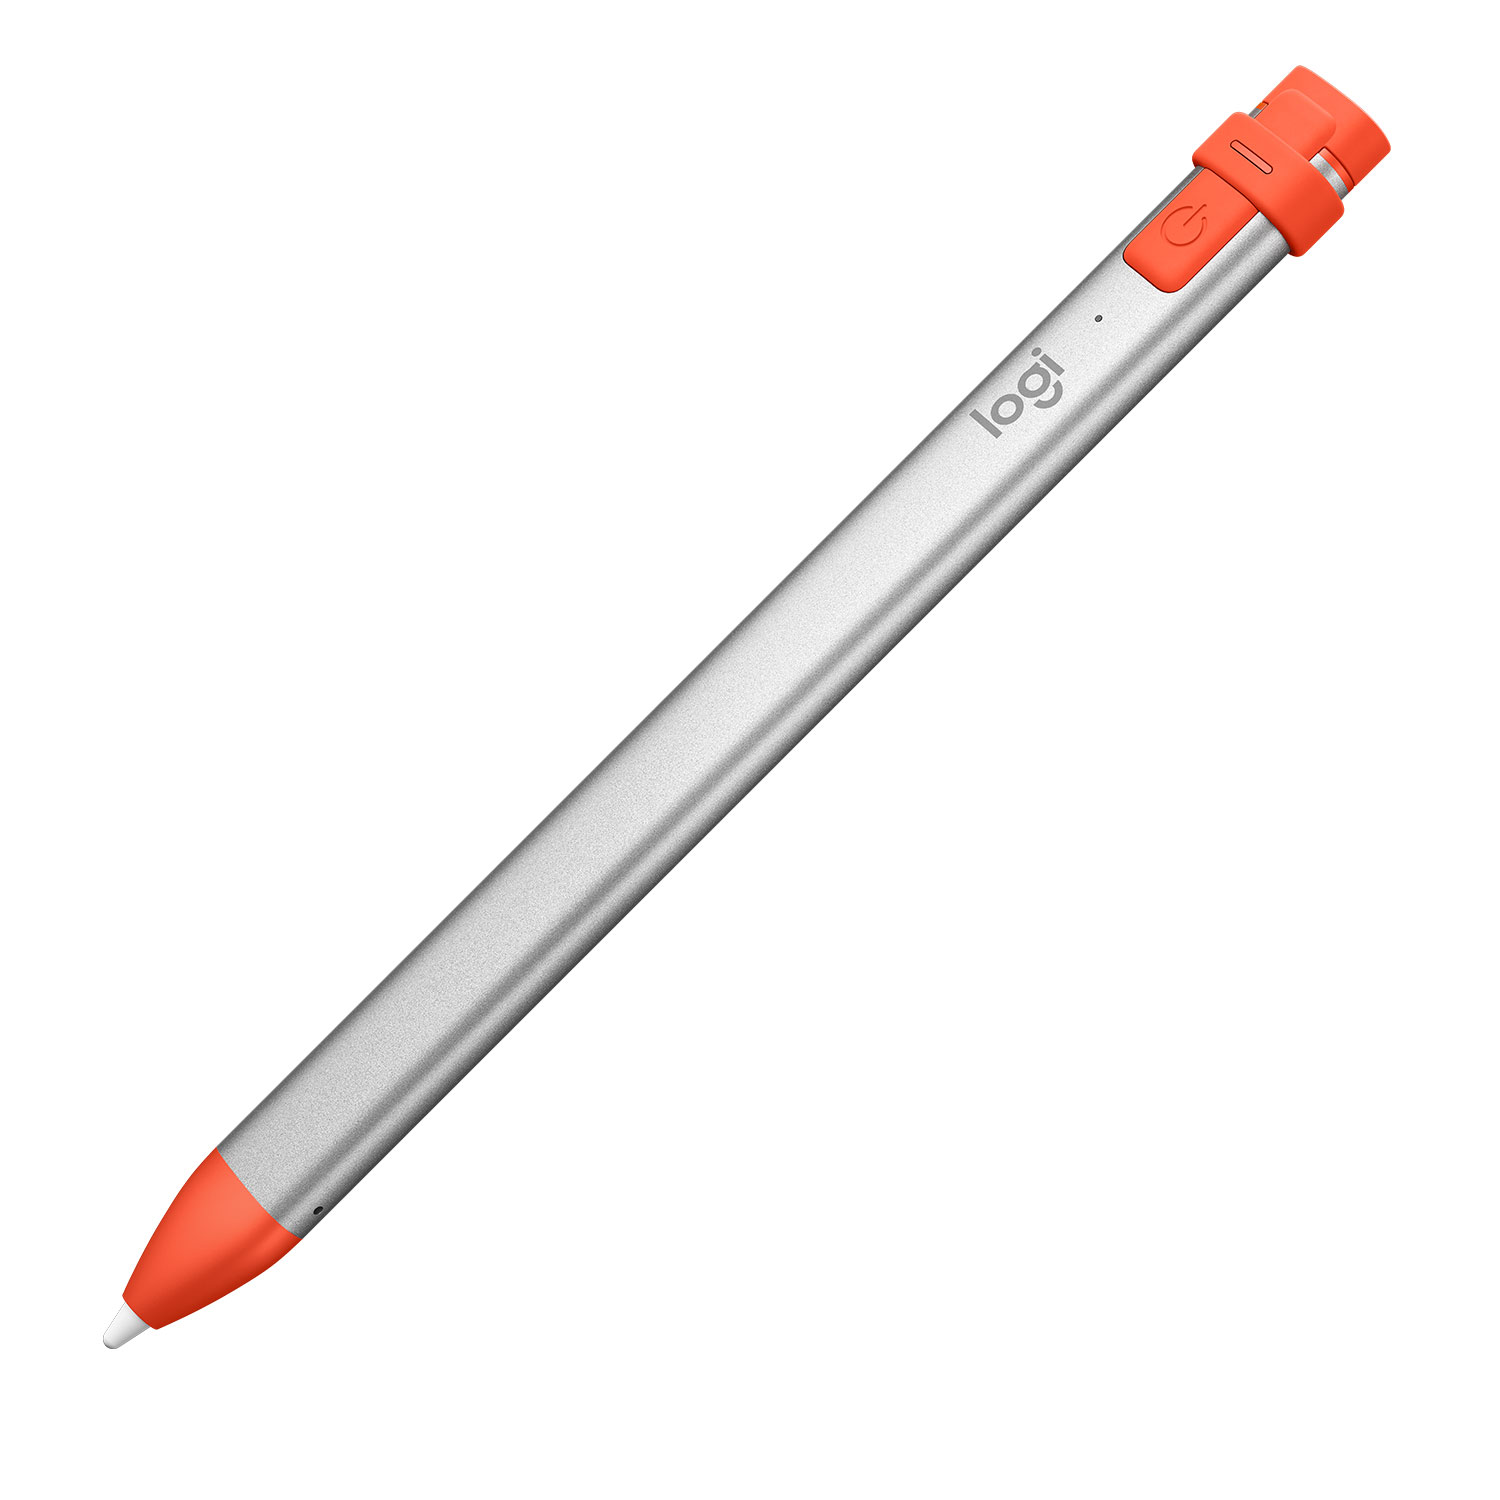 Questions and Answers: Logitech Crayon Digital Pencil for All